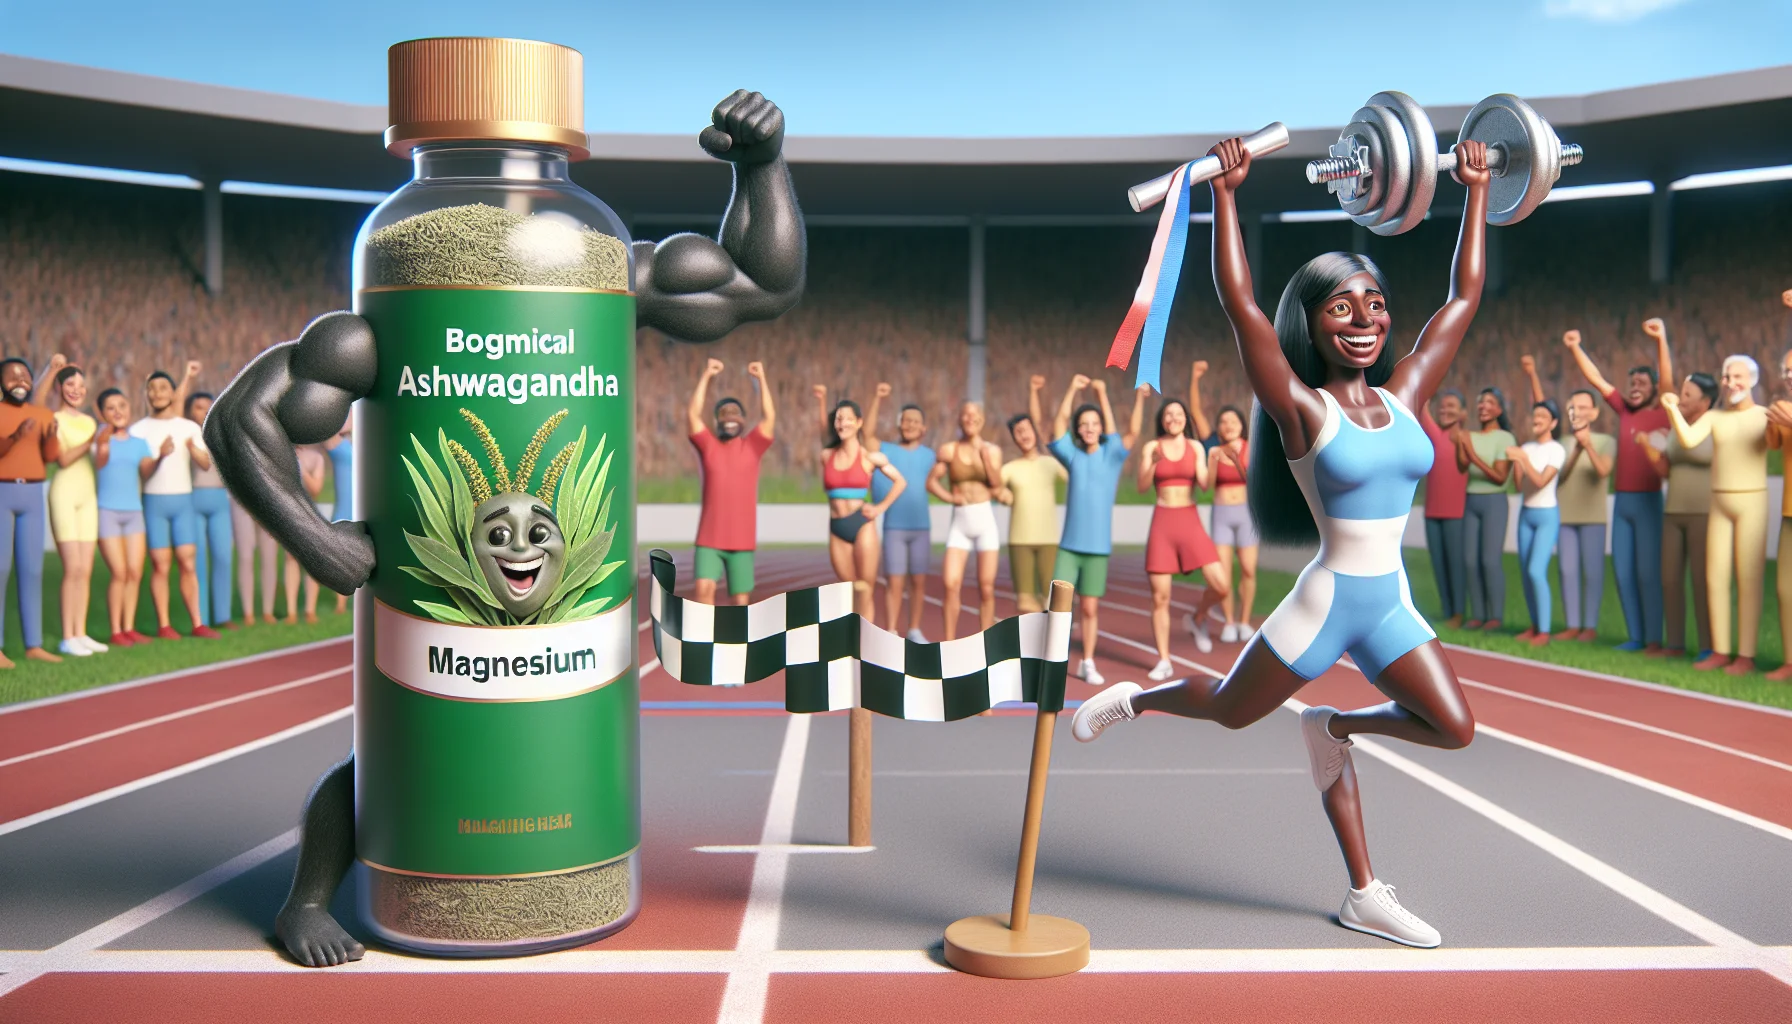 Create a humorous and appealing scene featuring the botanical Ashwagandha and Magnesium elements personified as two athletic figures. Ashwagandha, a Black male, is doing a victory dance while holding a finish line ribbon, showcasing a fit and healthy physique. Magnesium, a Hispanic female, is powerlifting a dumbbell effortlessly with a broad smile. The background is a sports ground with people of various descents cheering them. This image promotes the use of supplements for sports in a light-hearted way.